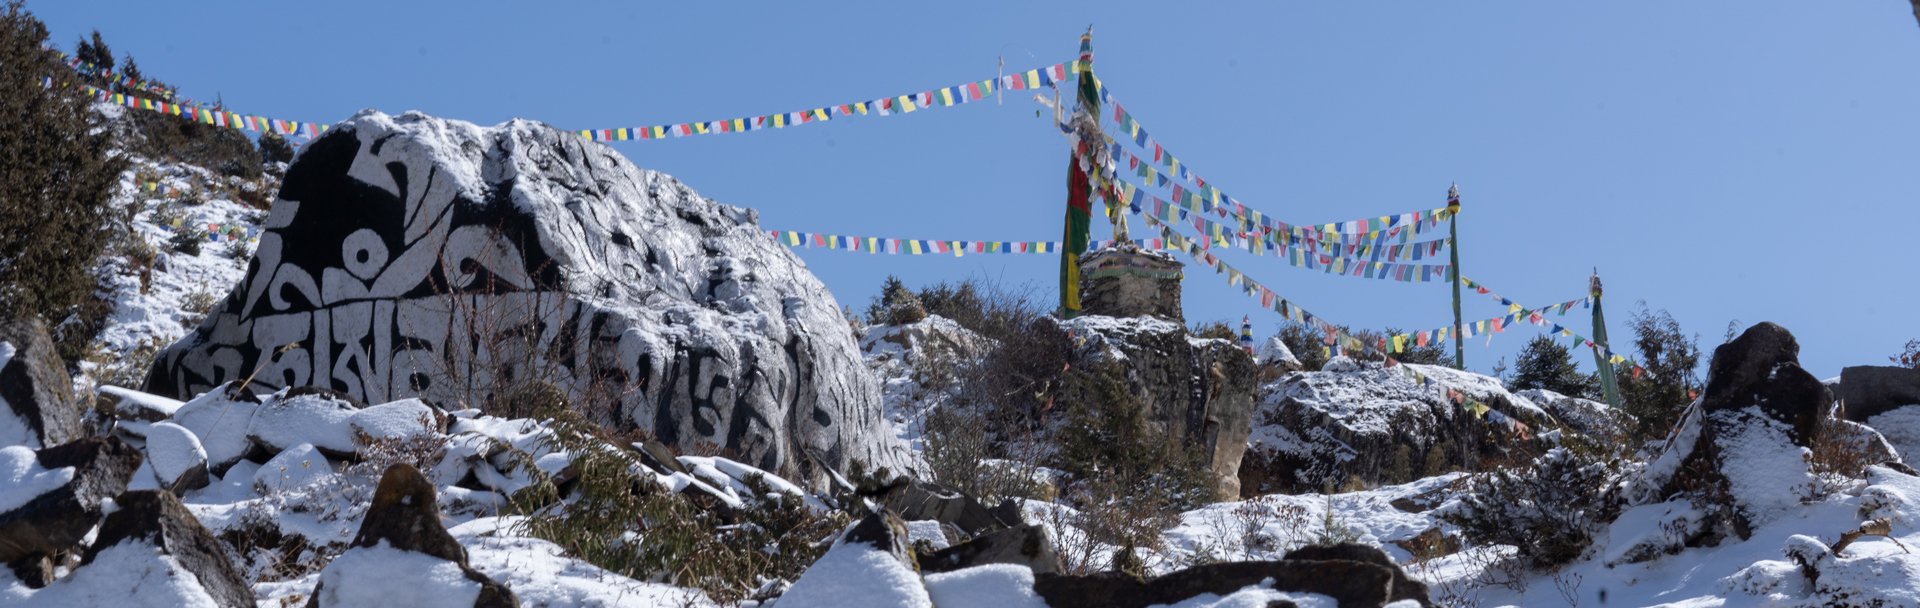 prayer flags and mani stones in the snow under a blue sky